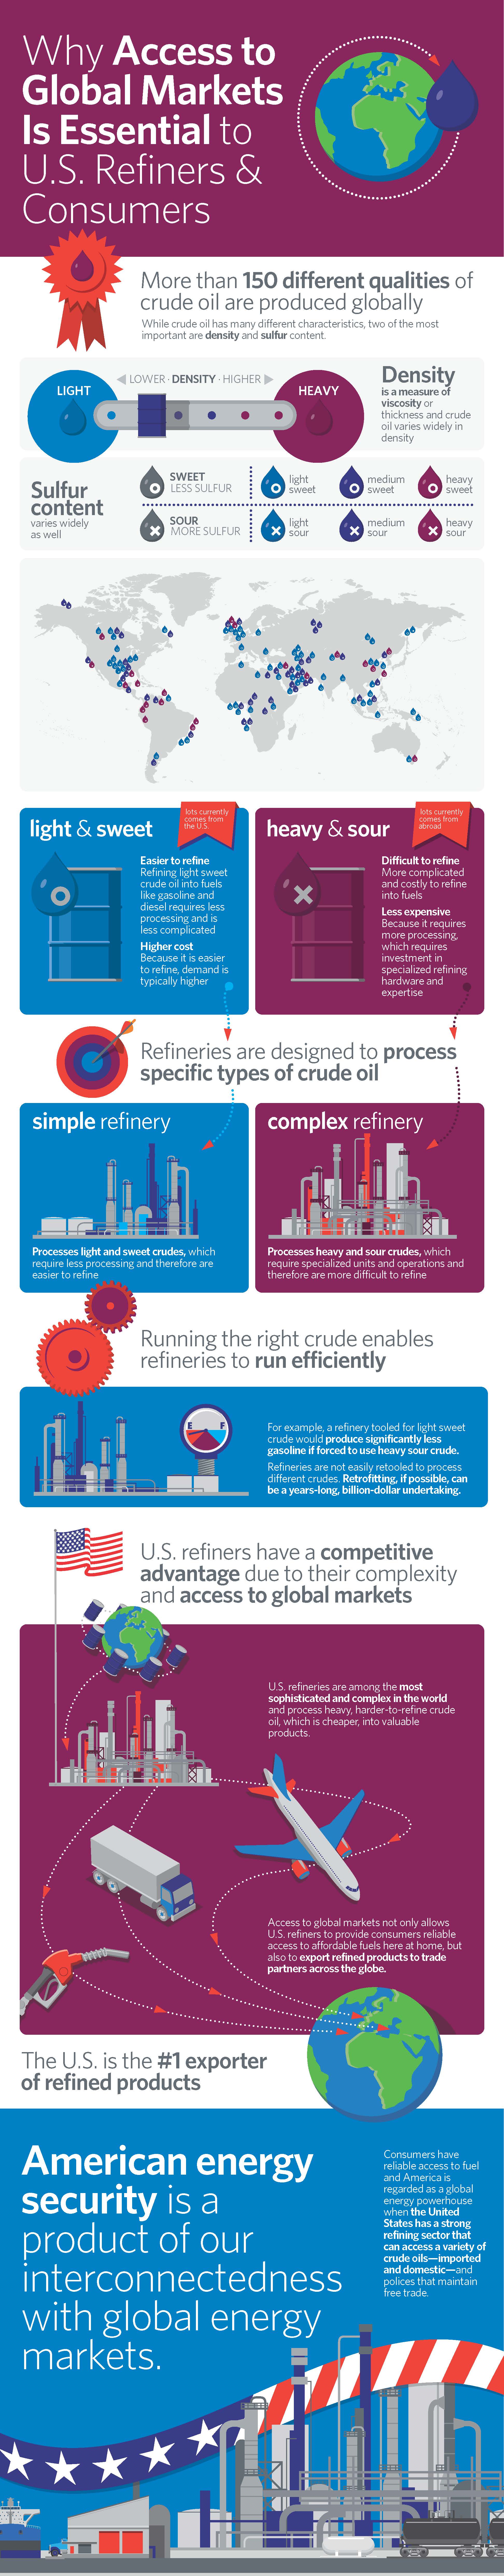 Why Access to Global Markets Is Essential to U.S. Refiners & Consumers